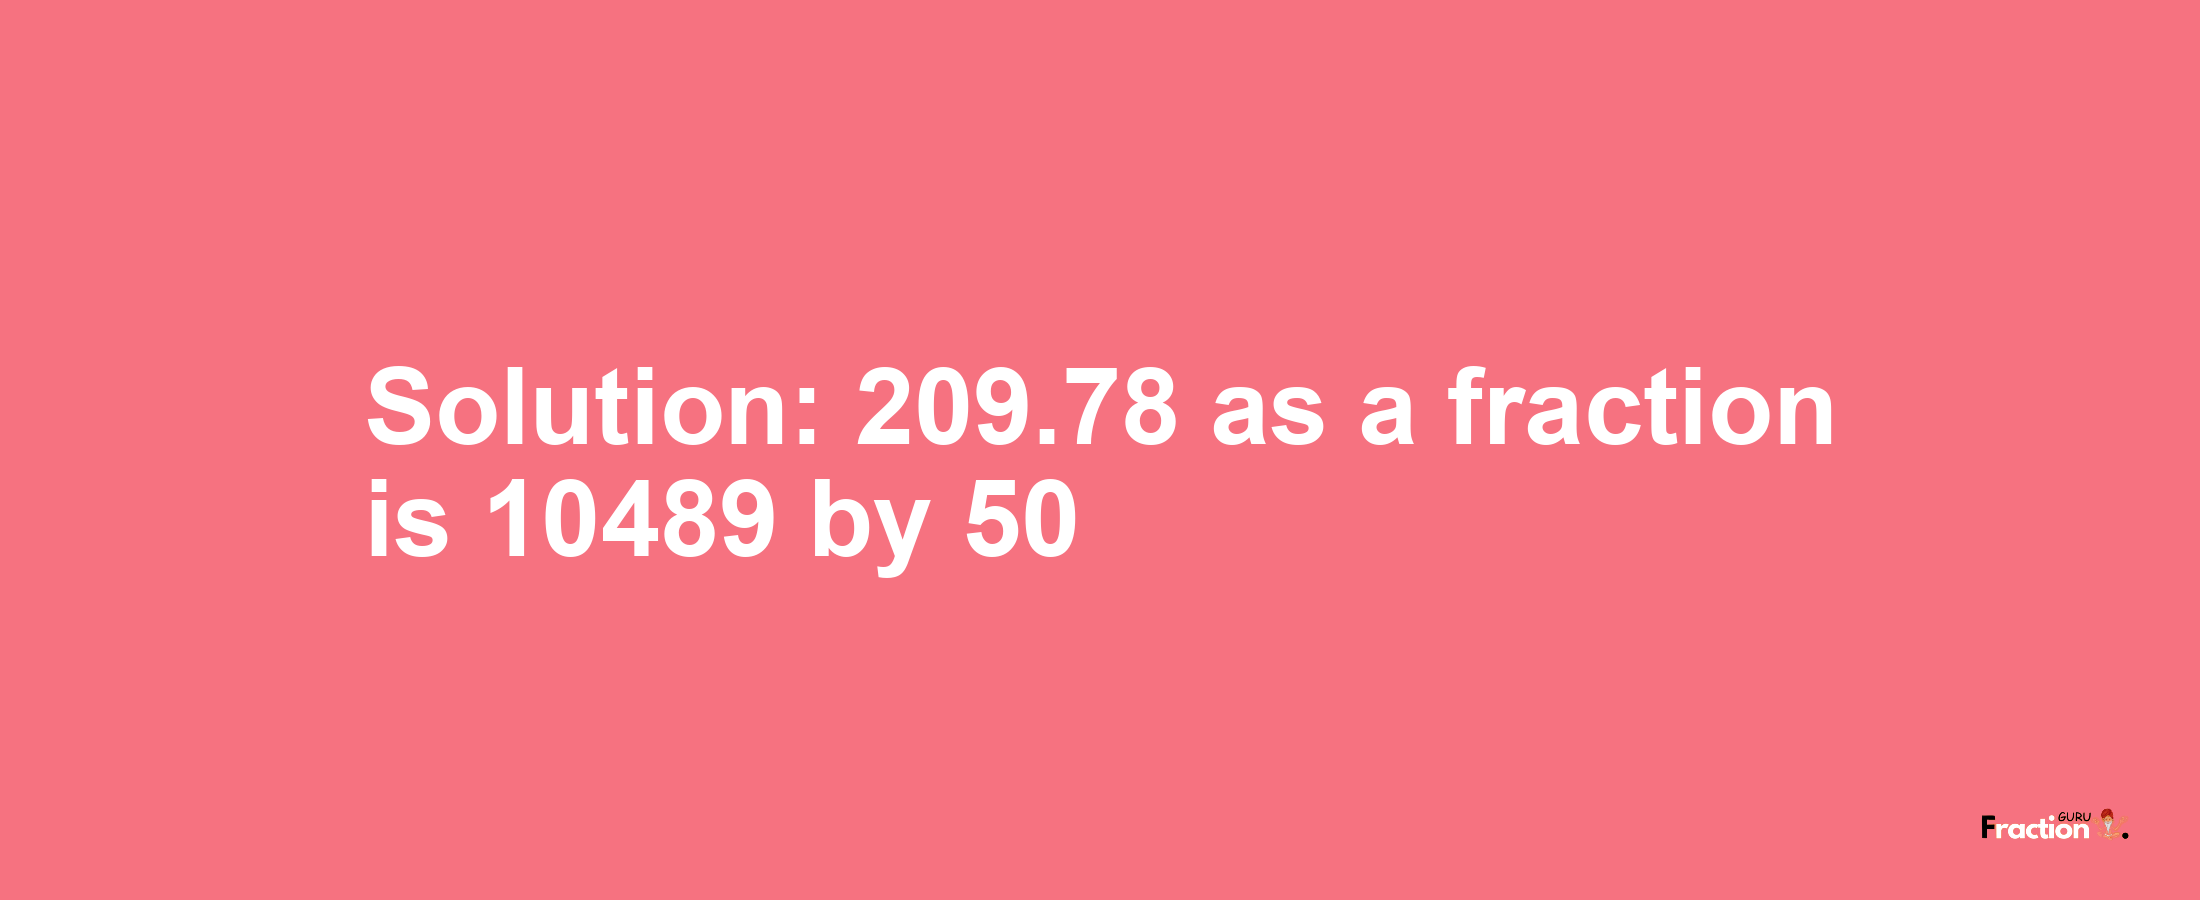 Solution:209.78 as a fraction is 10489/50